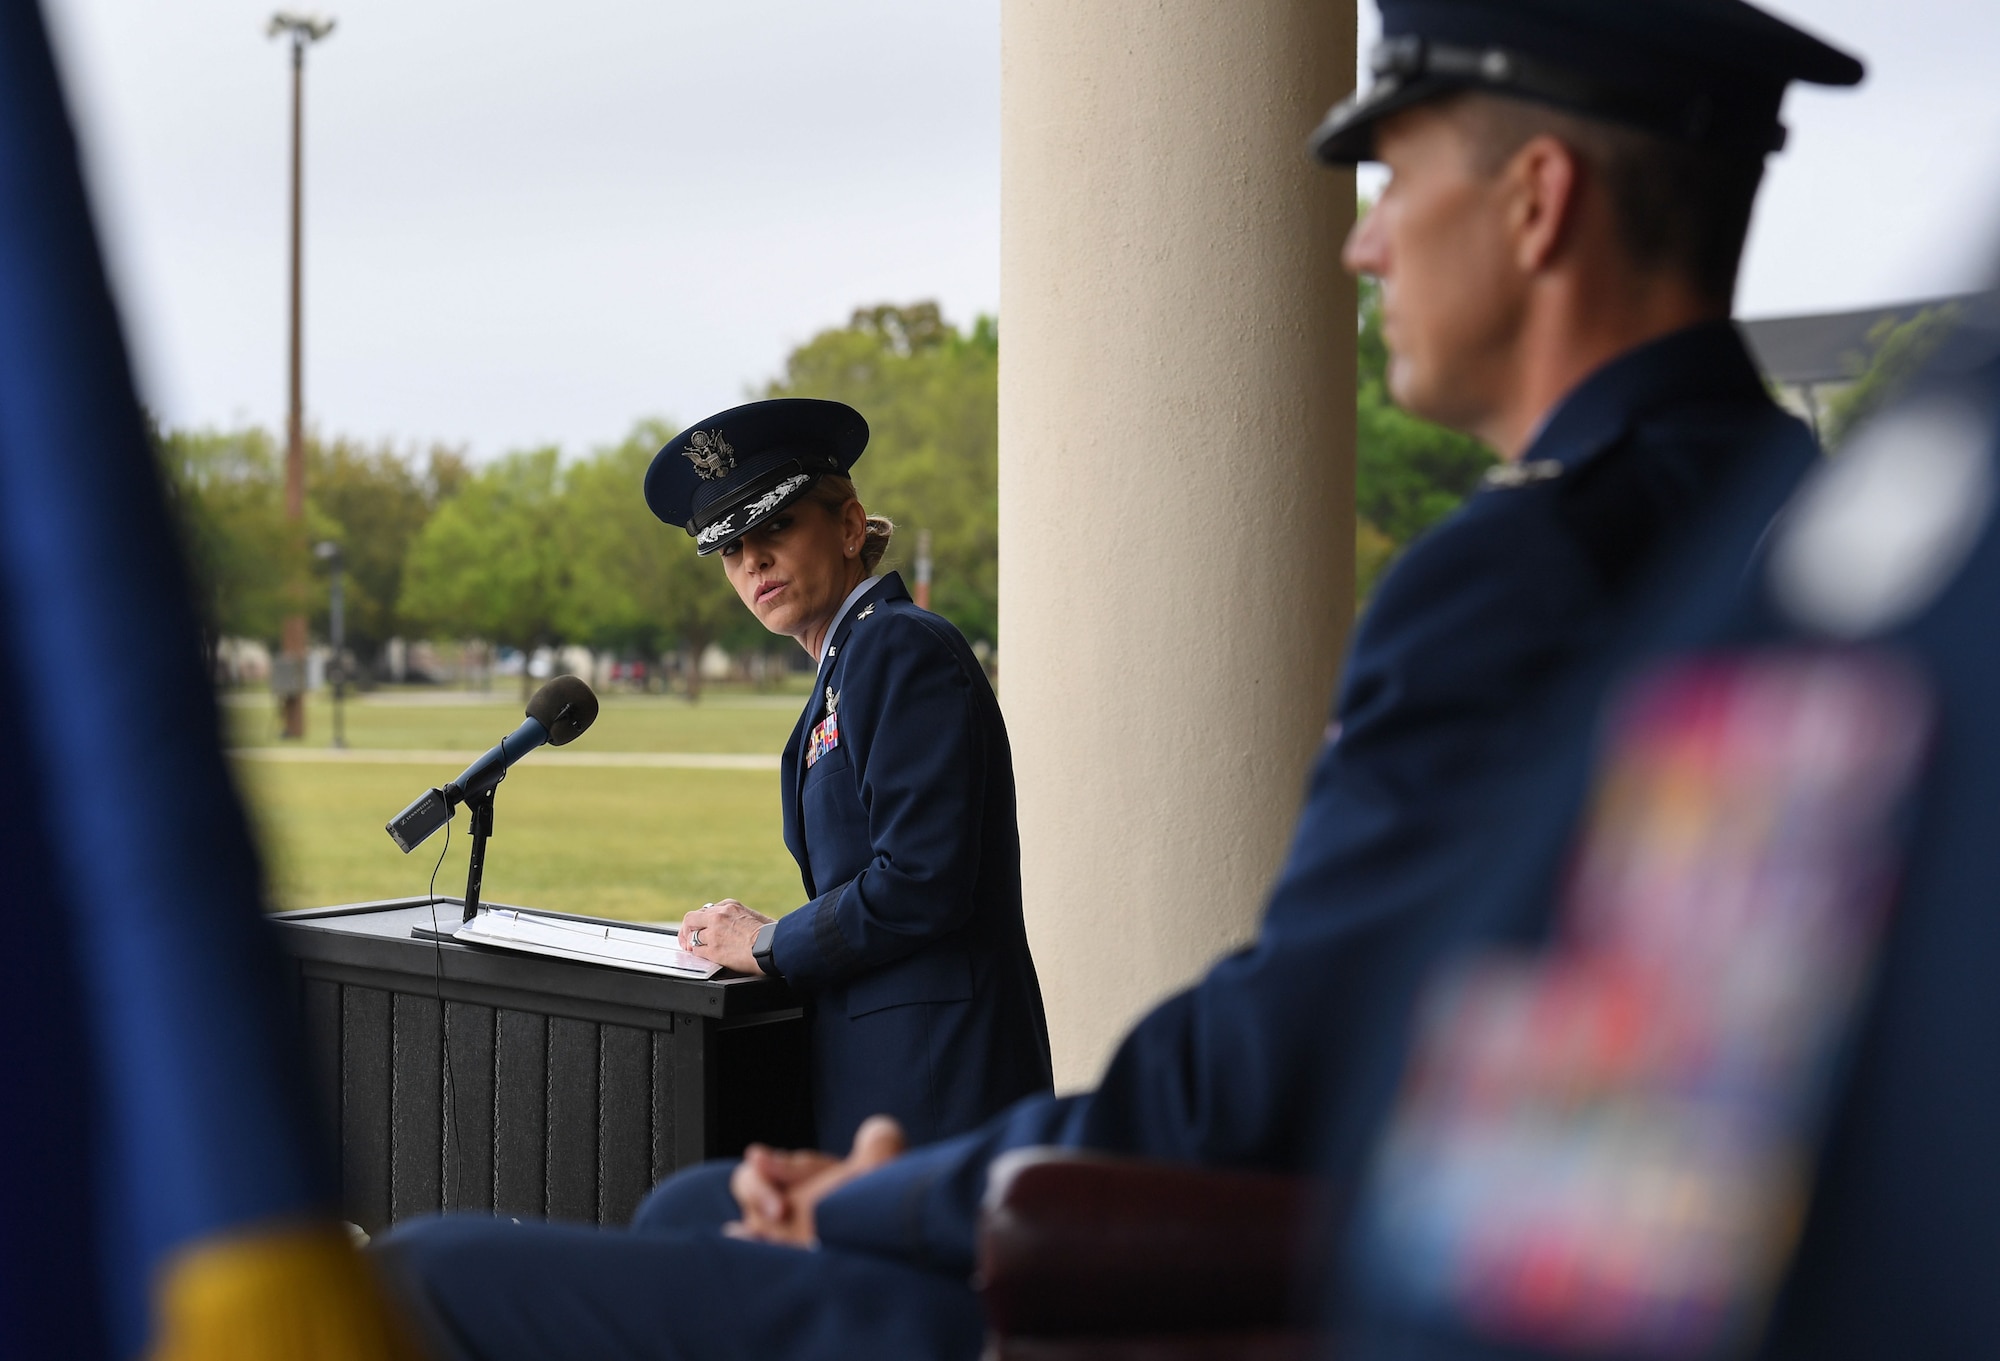 U.S. Air Force Maj. Gen. Michele Edmondson, Second Air Force commander, delivers remarks during the 81st Training Wing assumption of command ceremony on the Levitow Training Support Facility drill pad at Keesler Air Force Base, Mississippi, March 23, 2023.